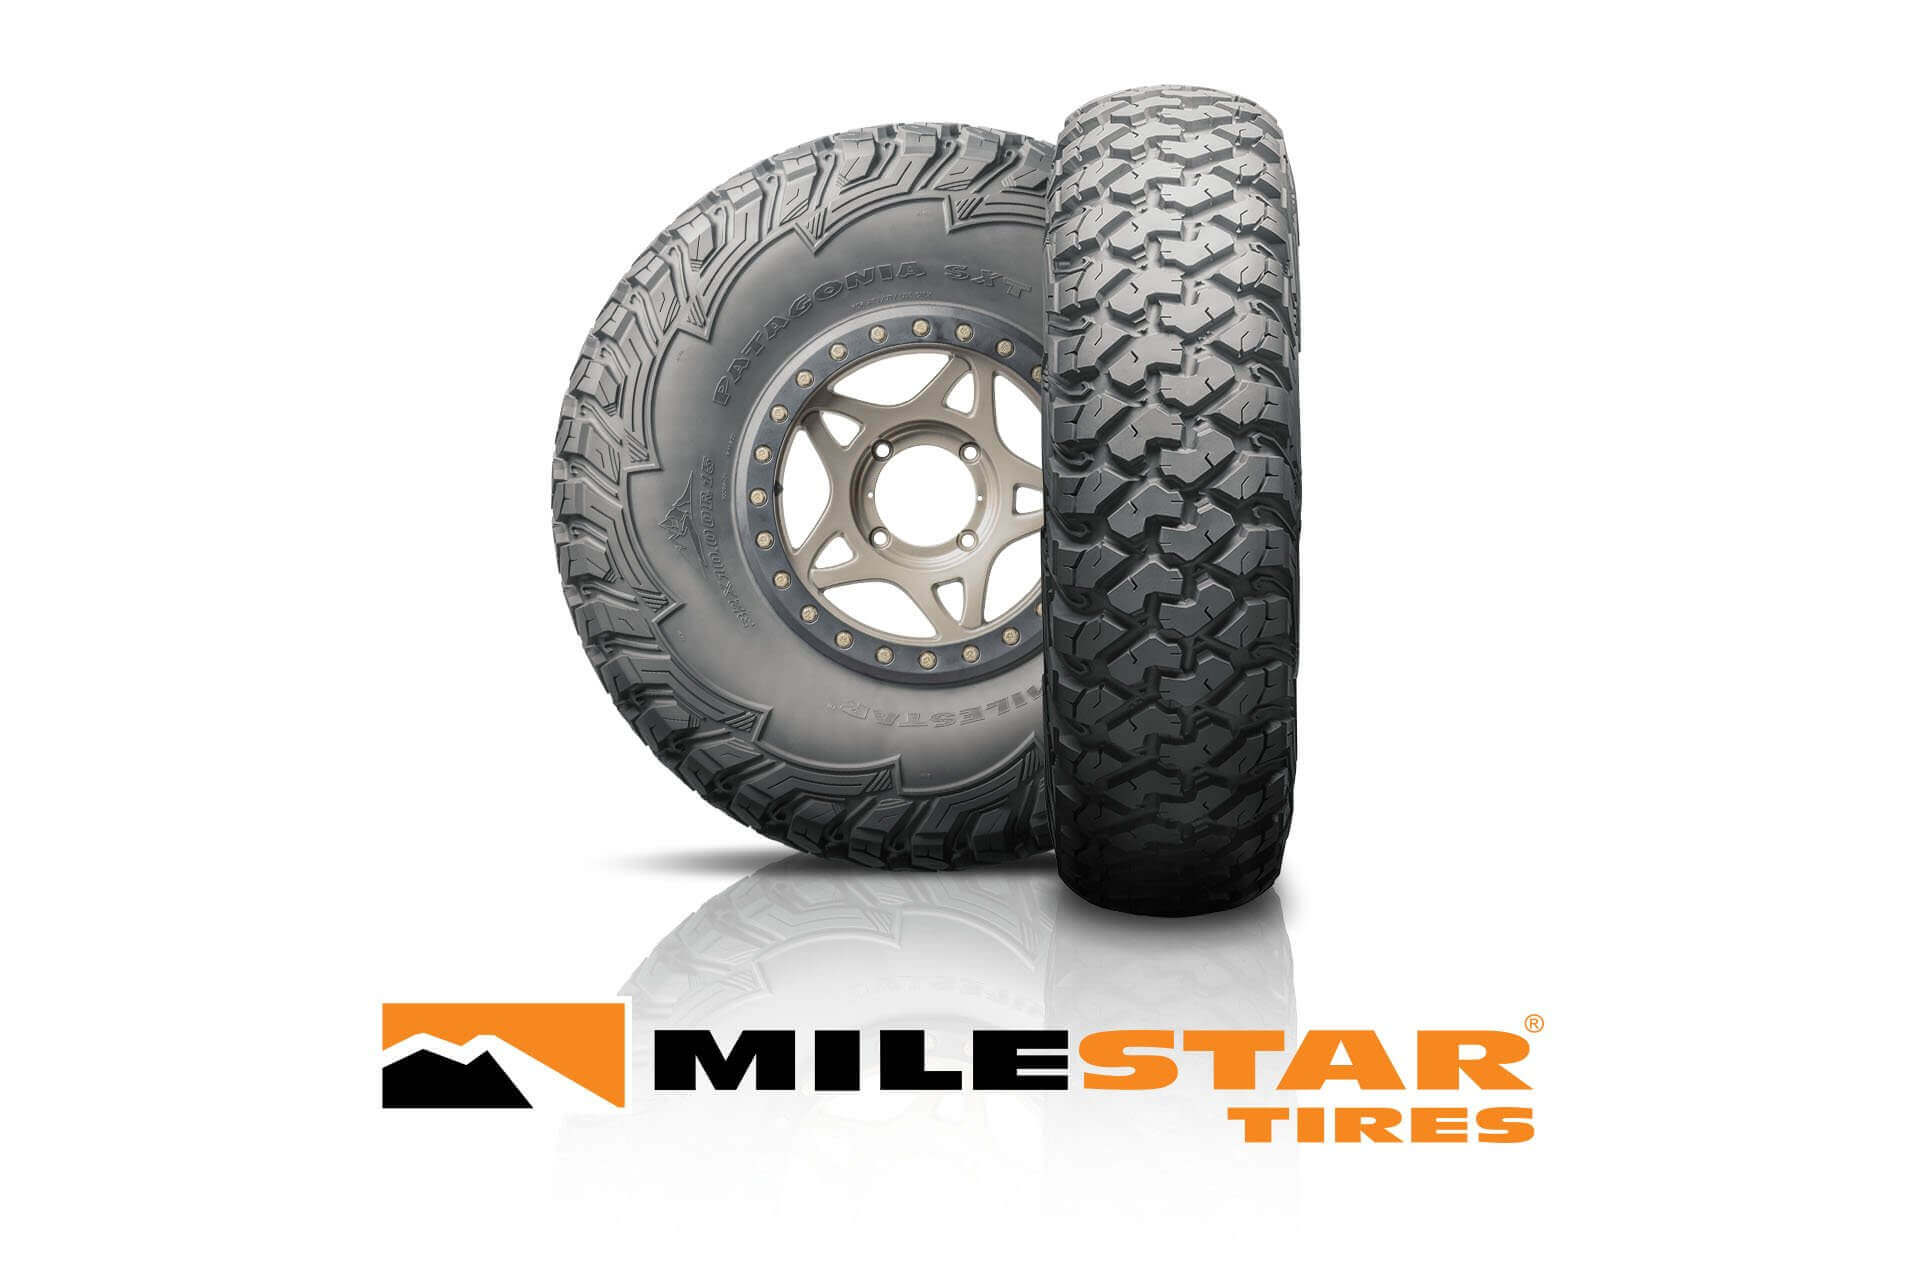 TIRECO’S MILESTAR BRAND ANNOUNCES FIRST ENTRY TO THE BAJA 1000